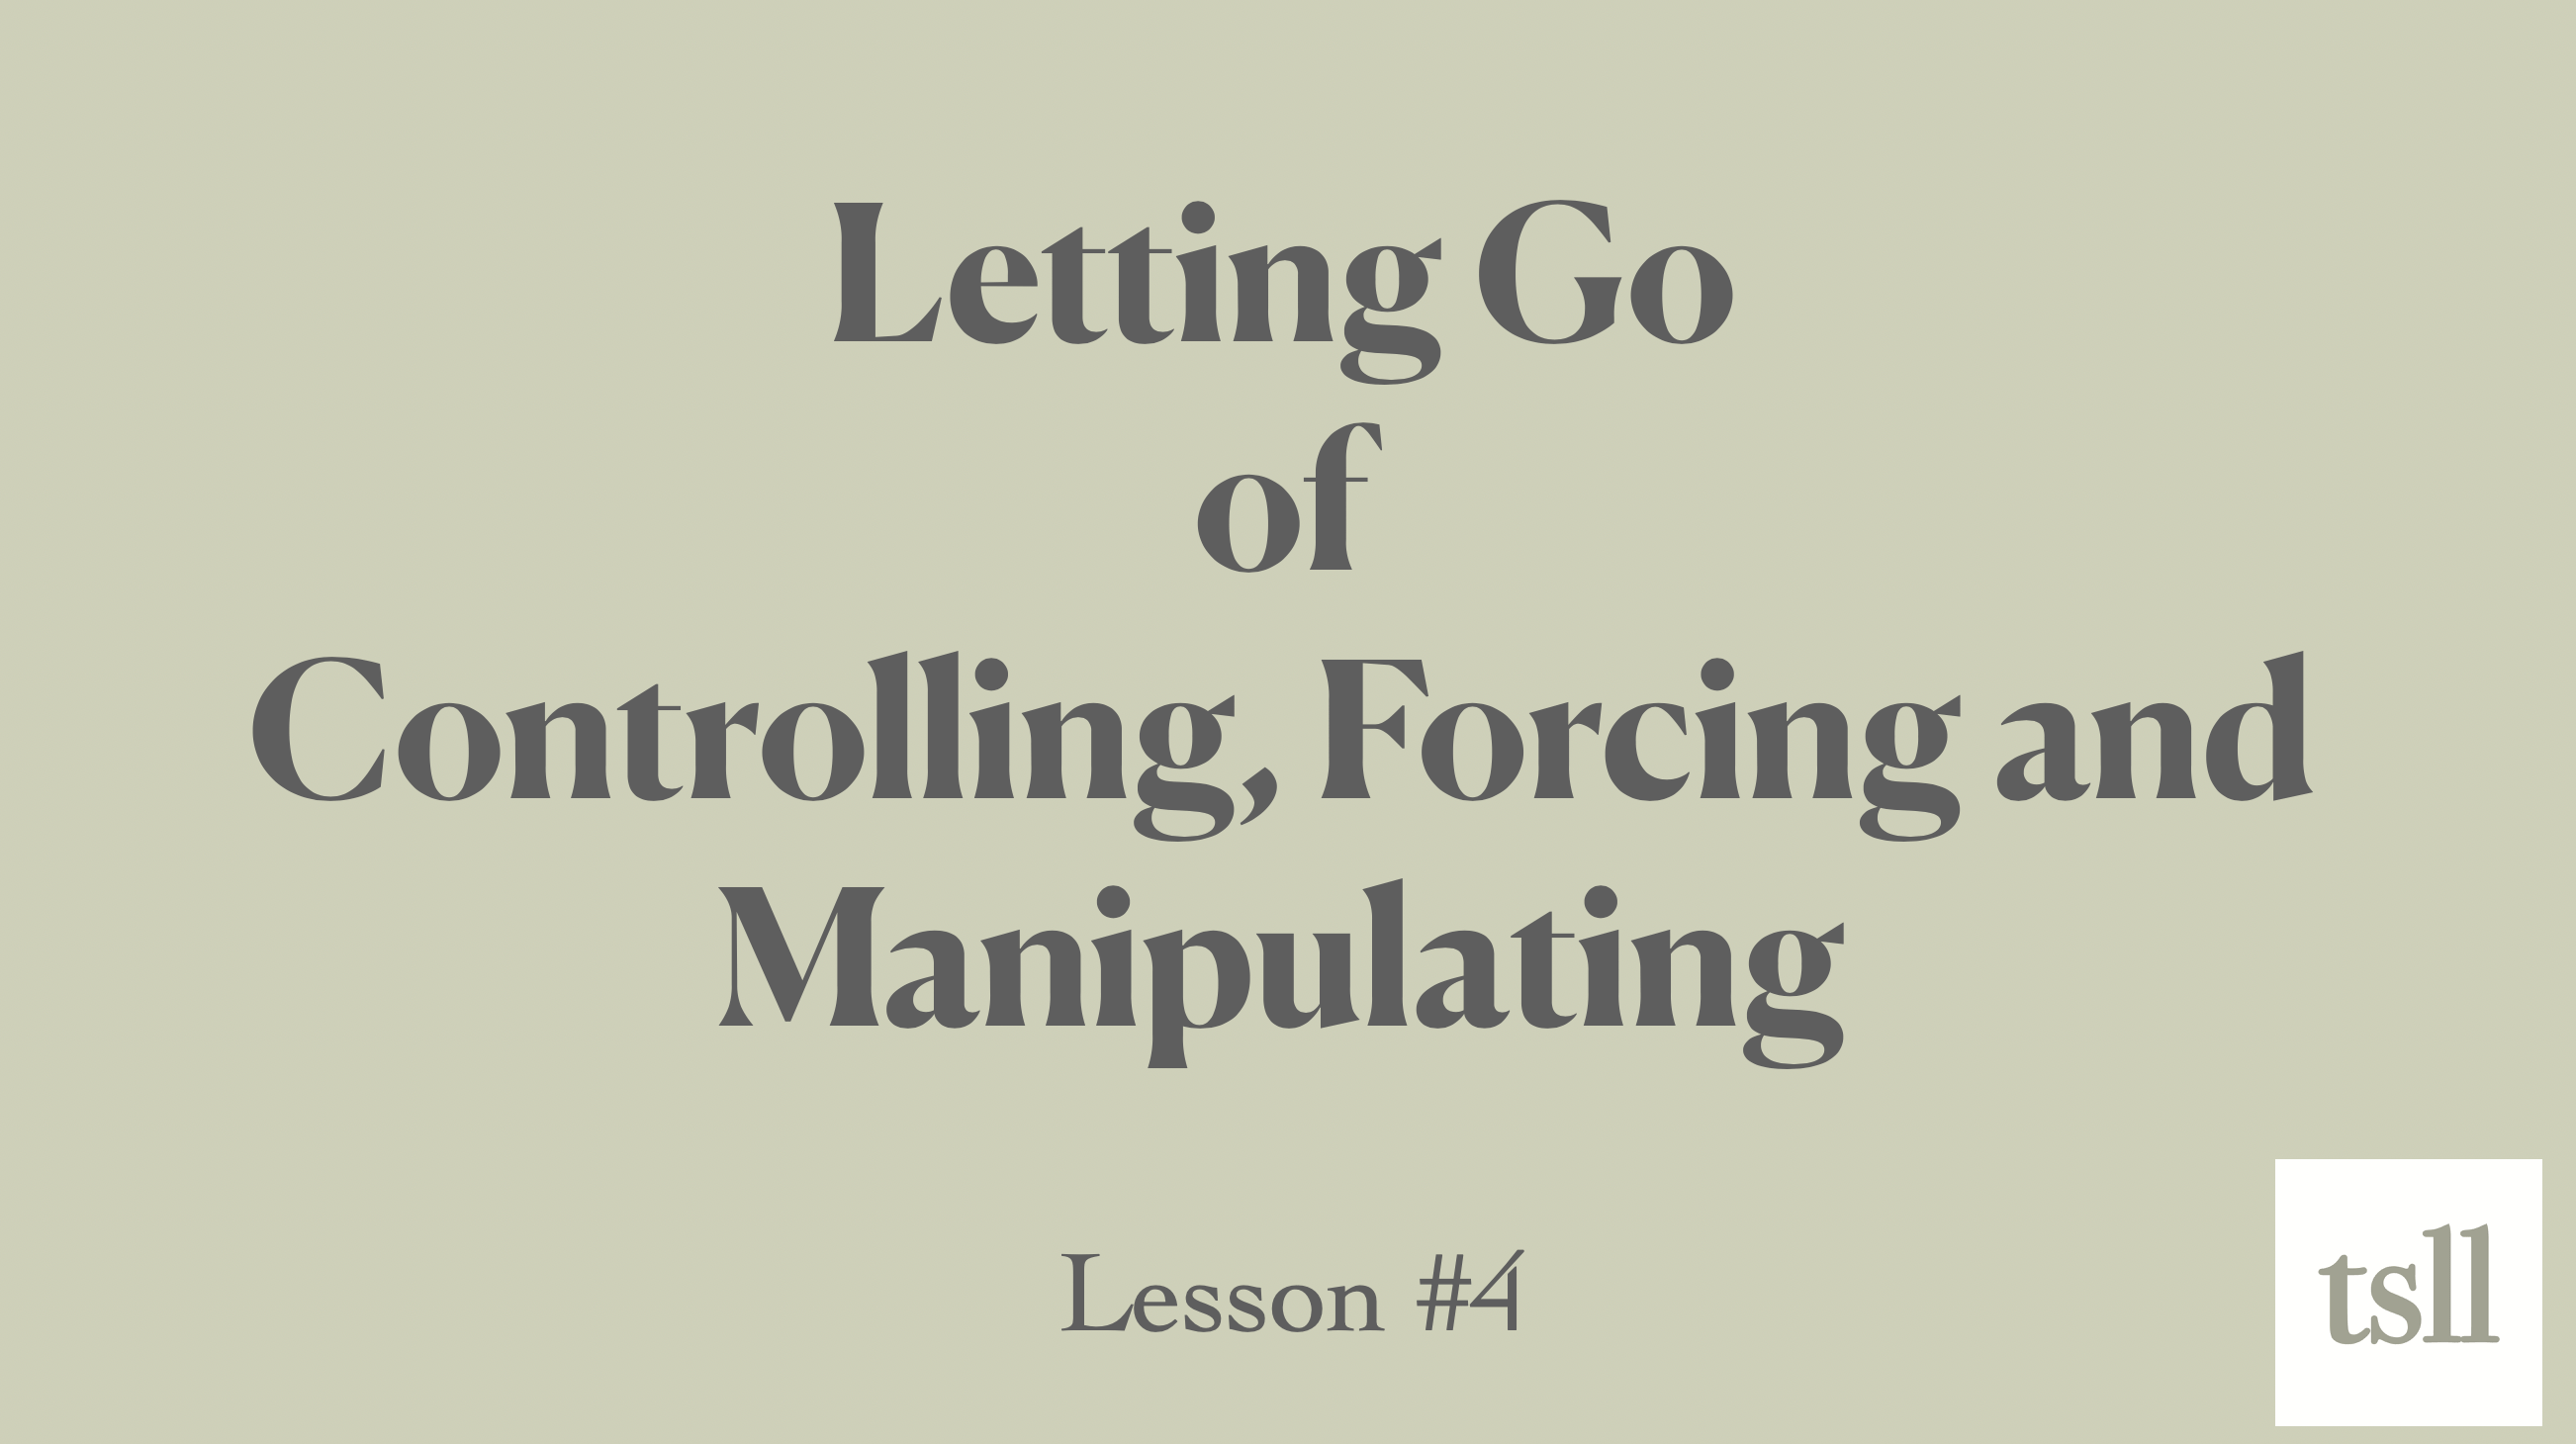 Part 5: Letting go of Controlling, Forcing and Manipulating (8:52)